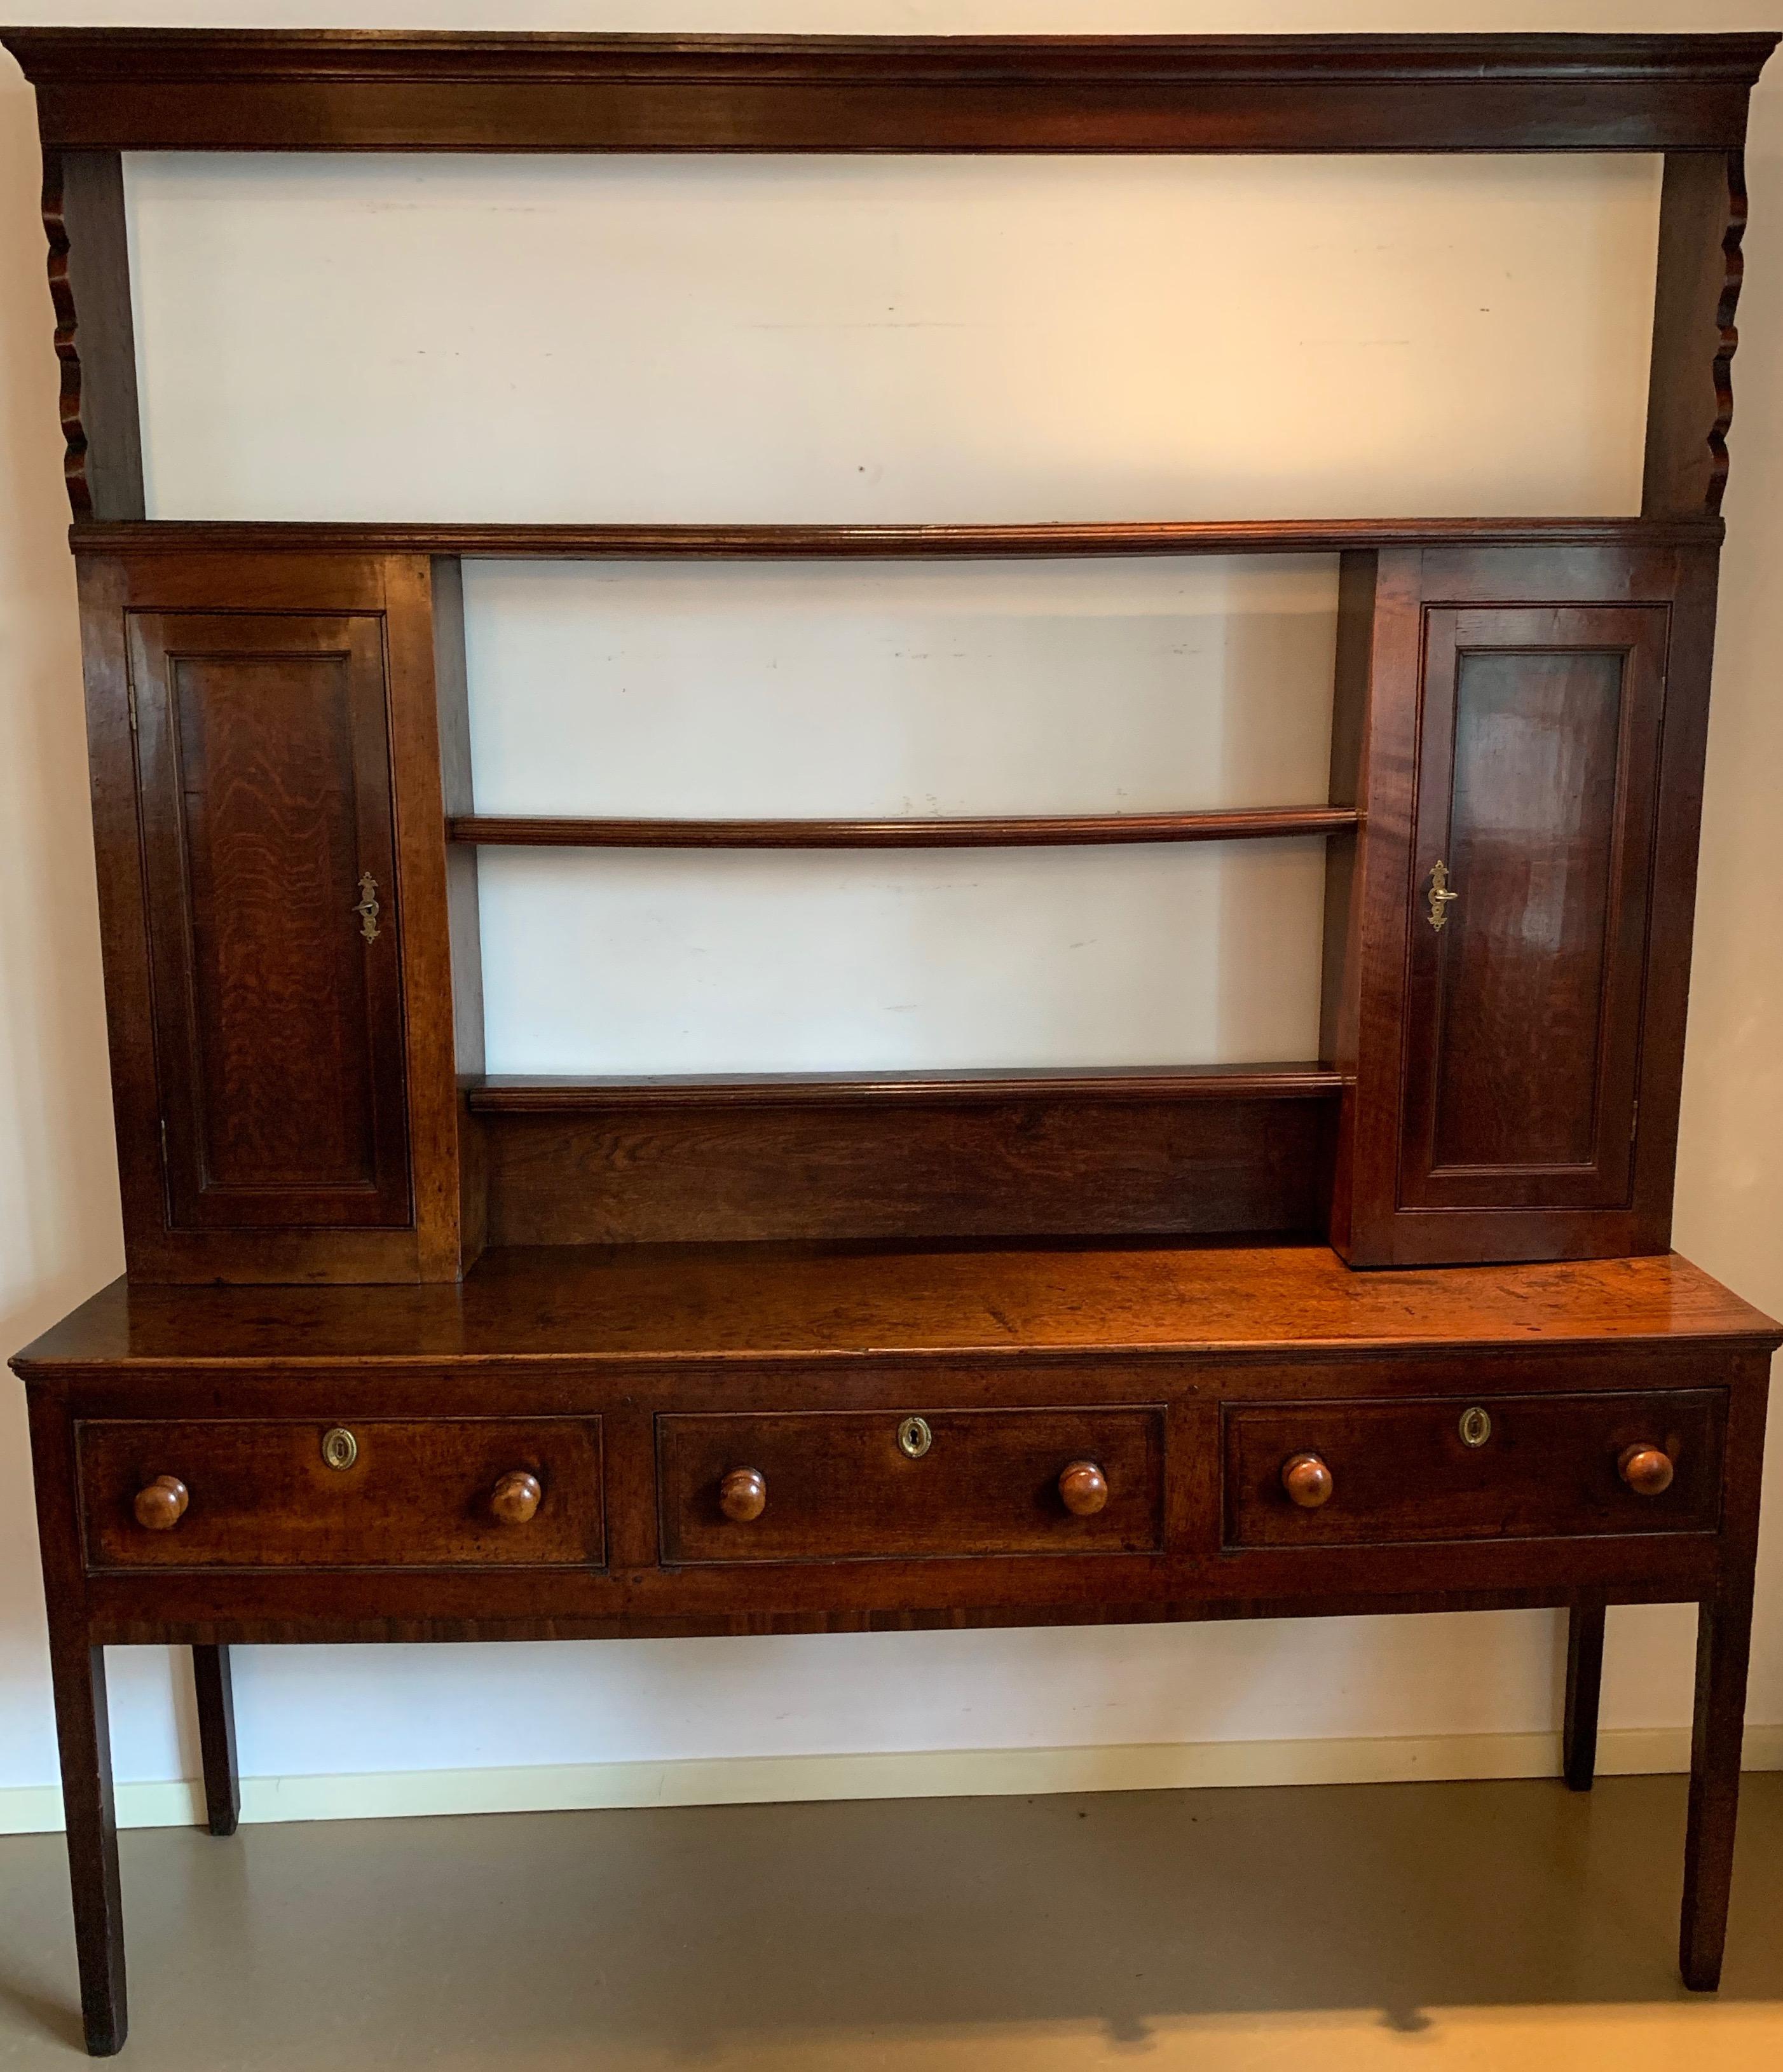 A stunning oak English Tin Dresser from 1760-1780 with a beautiful over 200 years old Patina.
Inlay crossbended with mahogany in the doors and drawers.

 